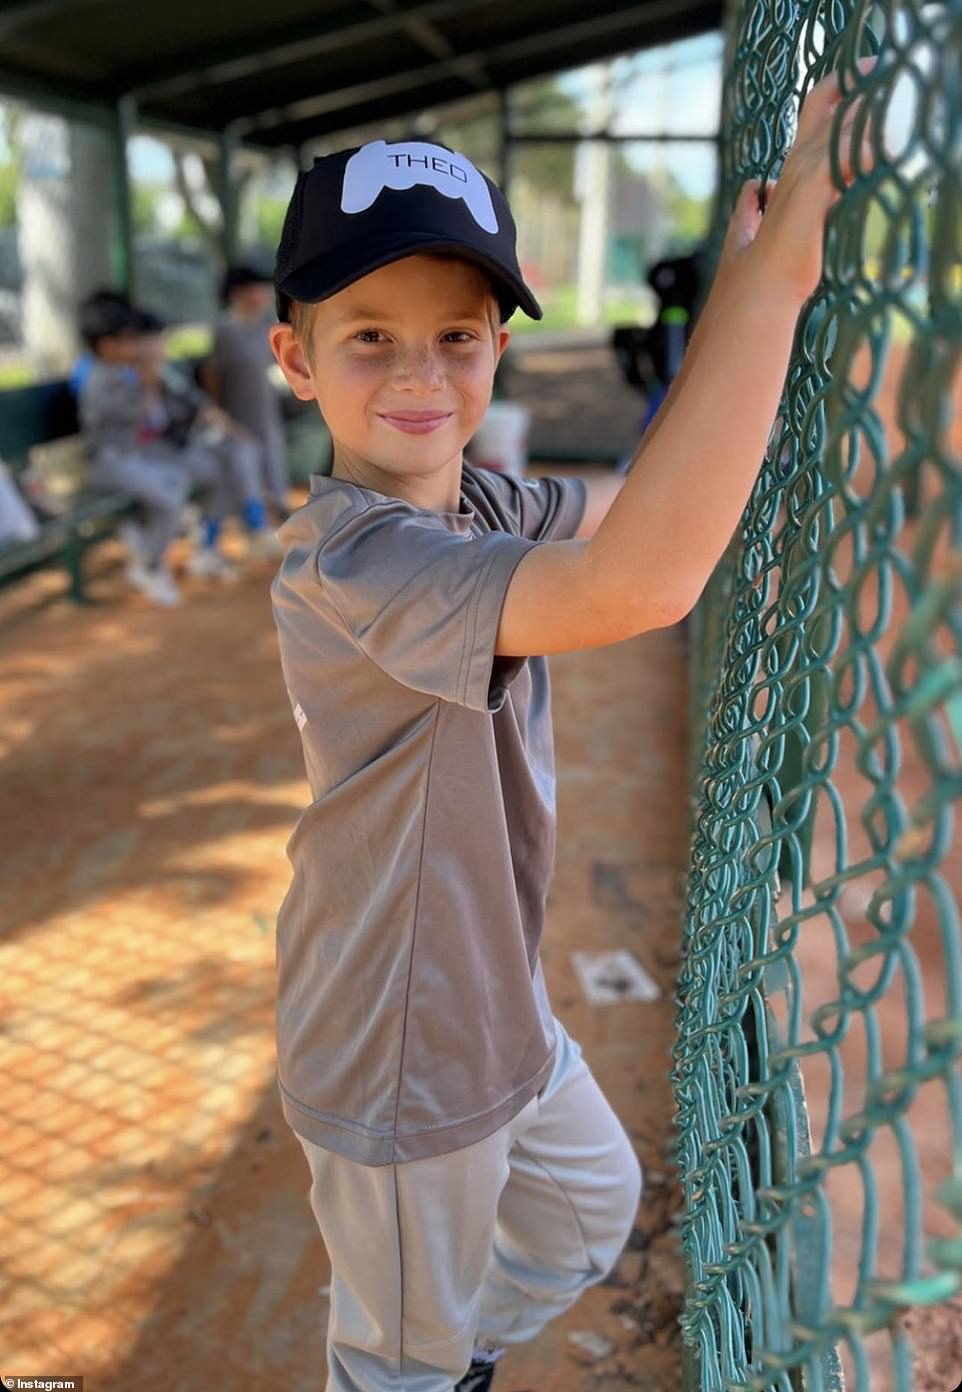 The proud mom also shared a sweet picture of Theo smiling in the dugout, his hands resting on the green chain link fence